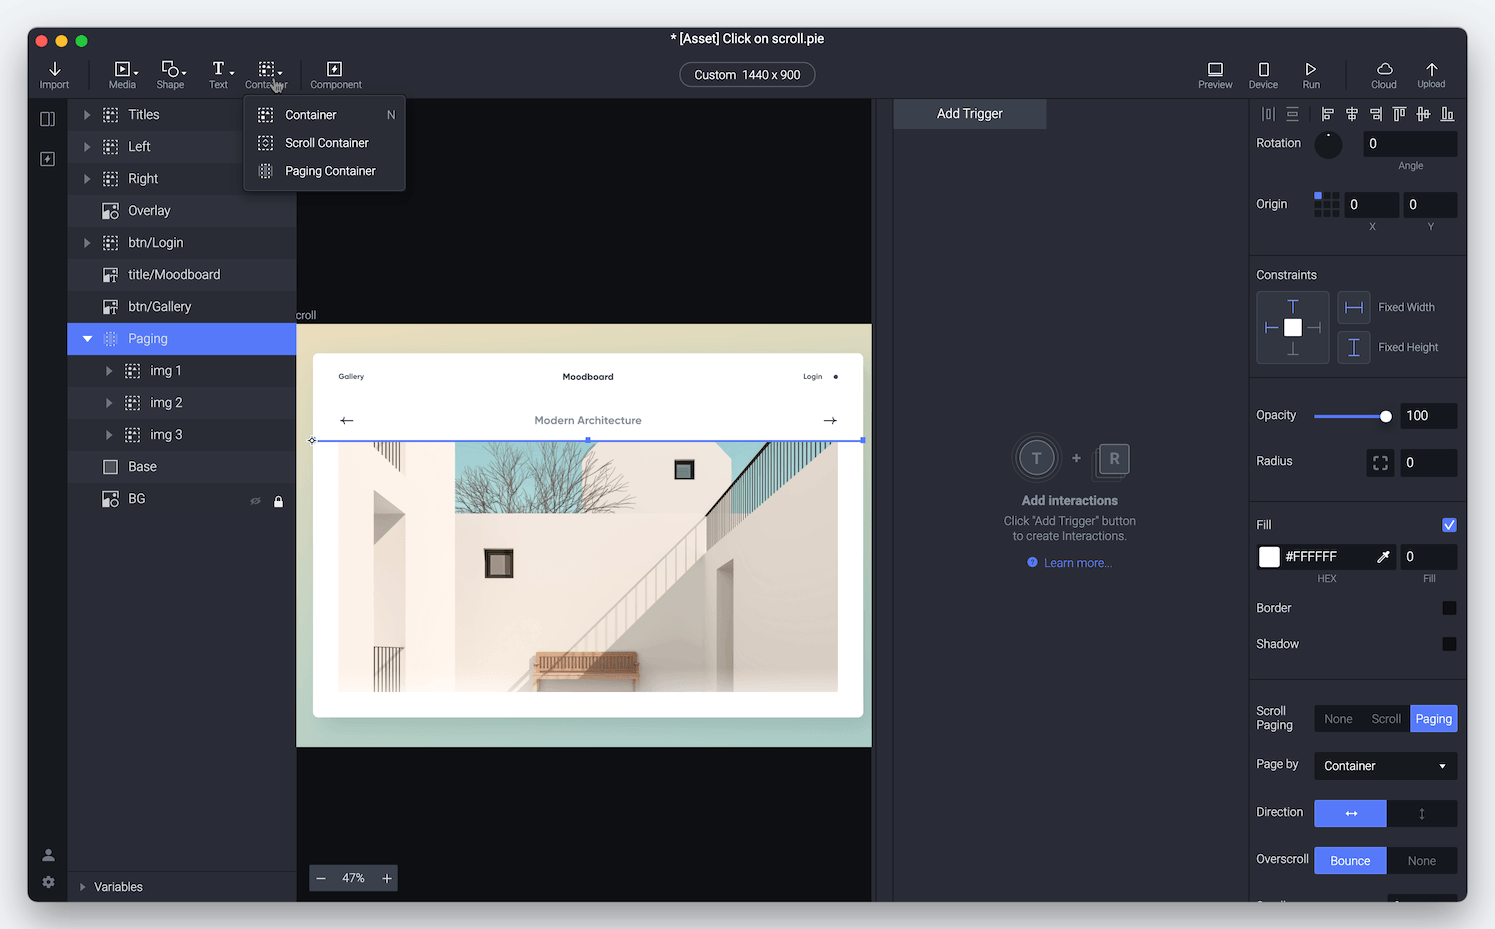 Add a new container to clip the overflowing images